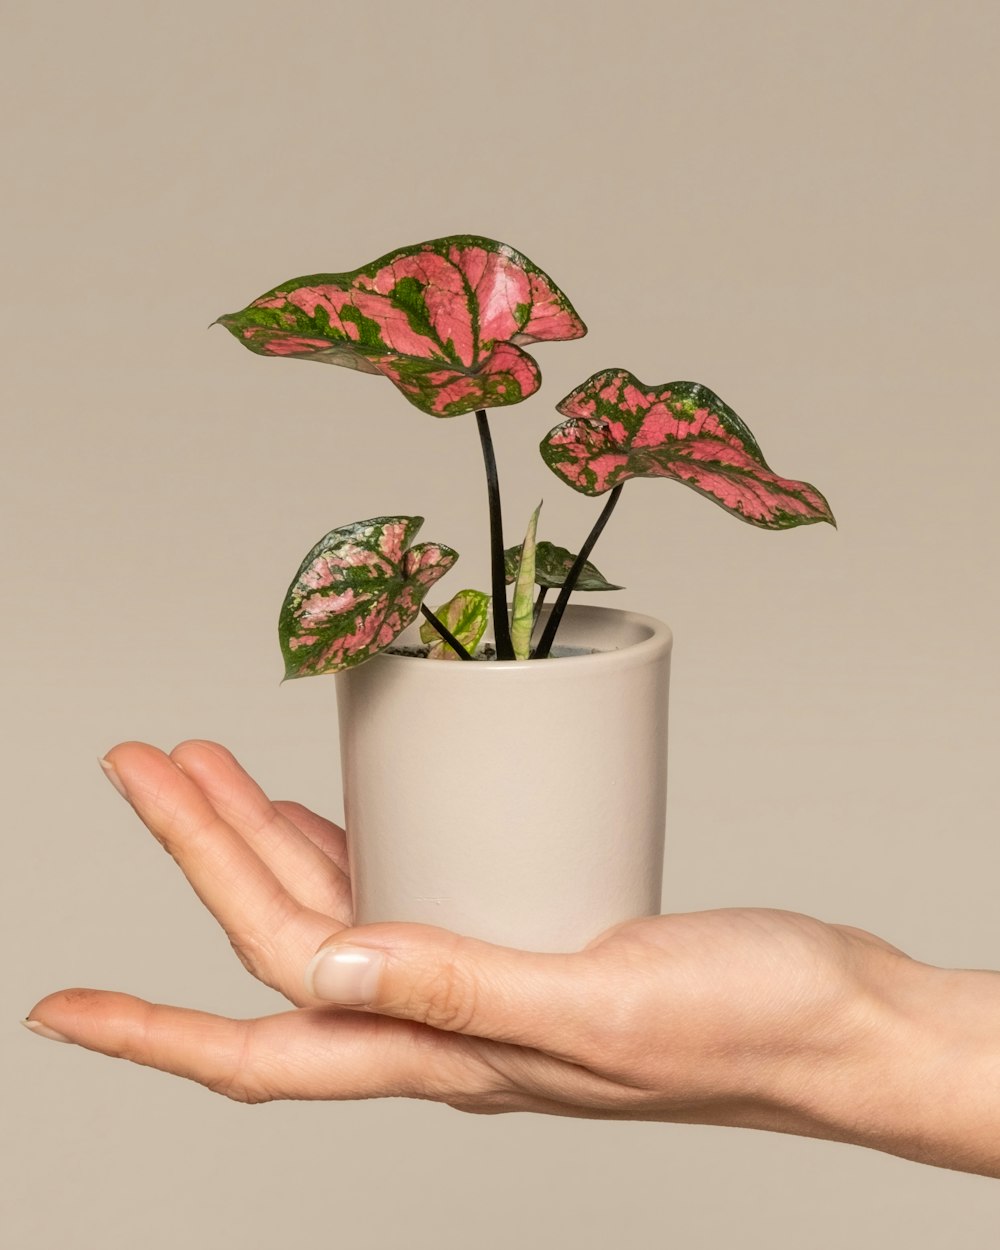 a hand holding a potted plant with pink flowers